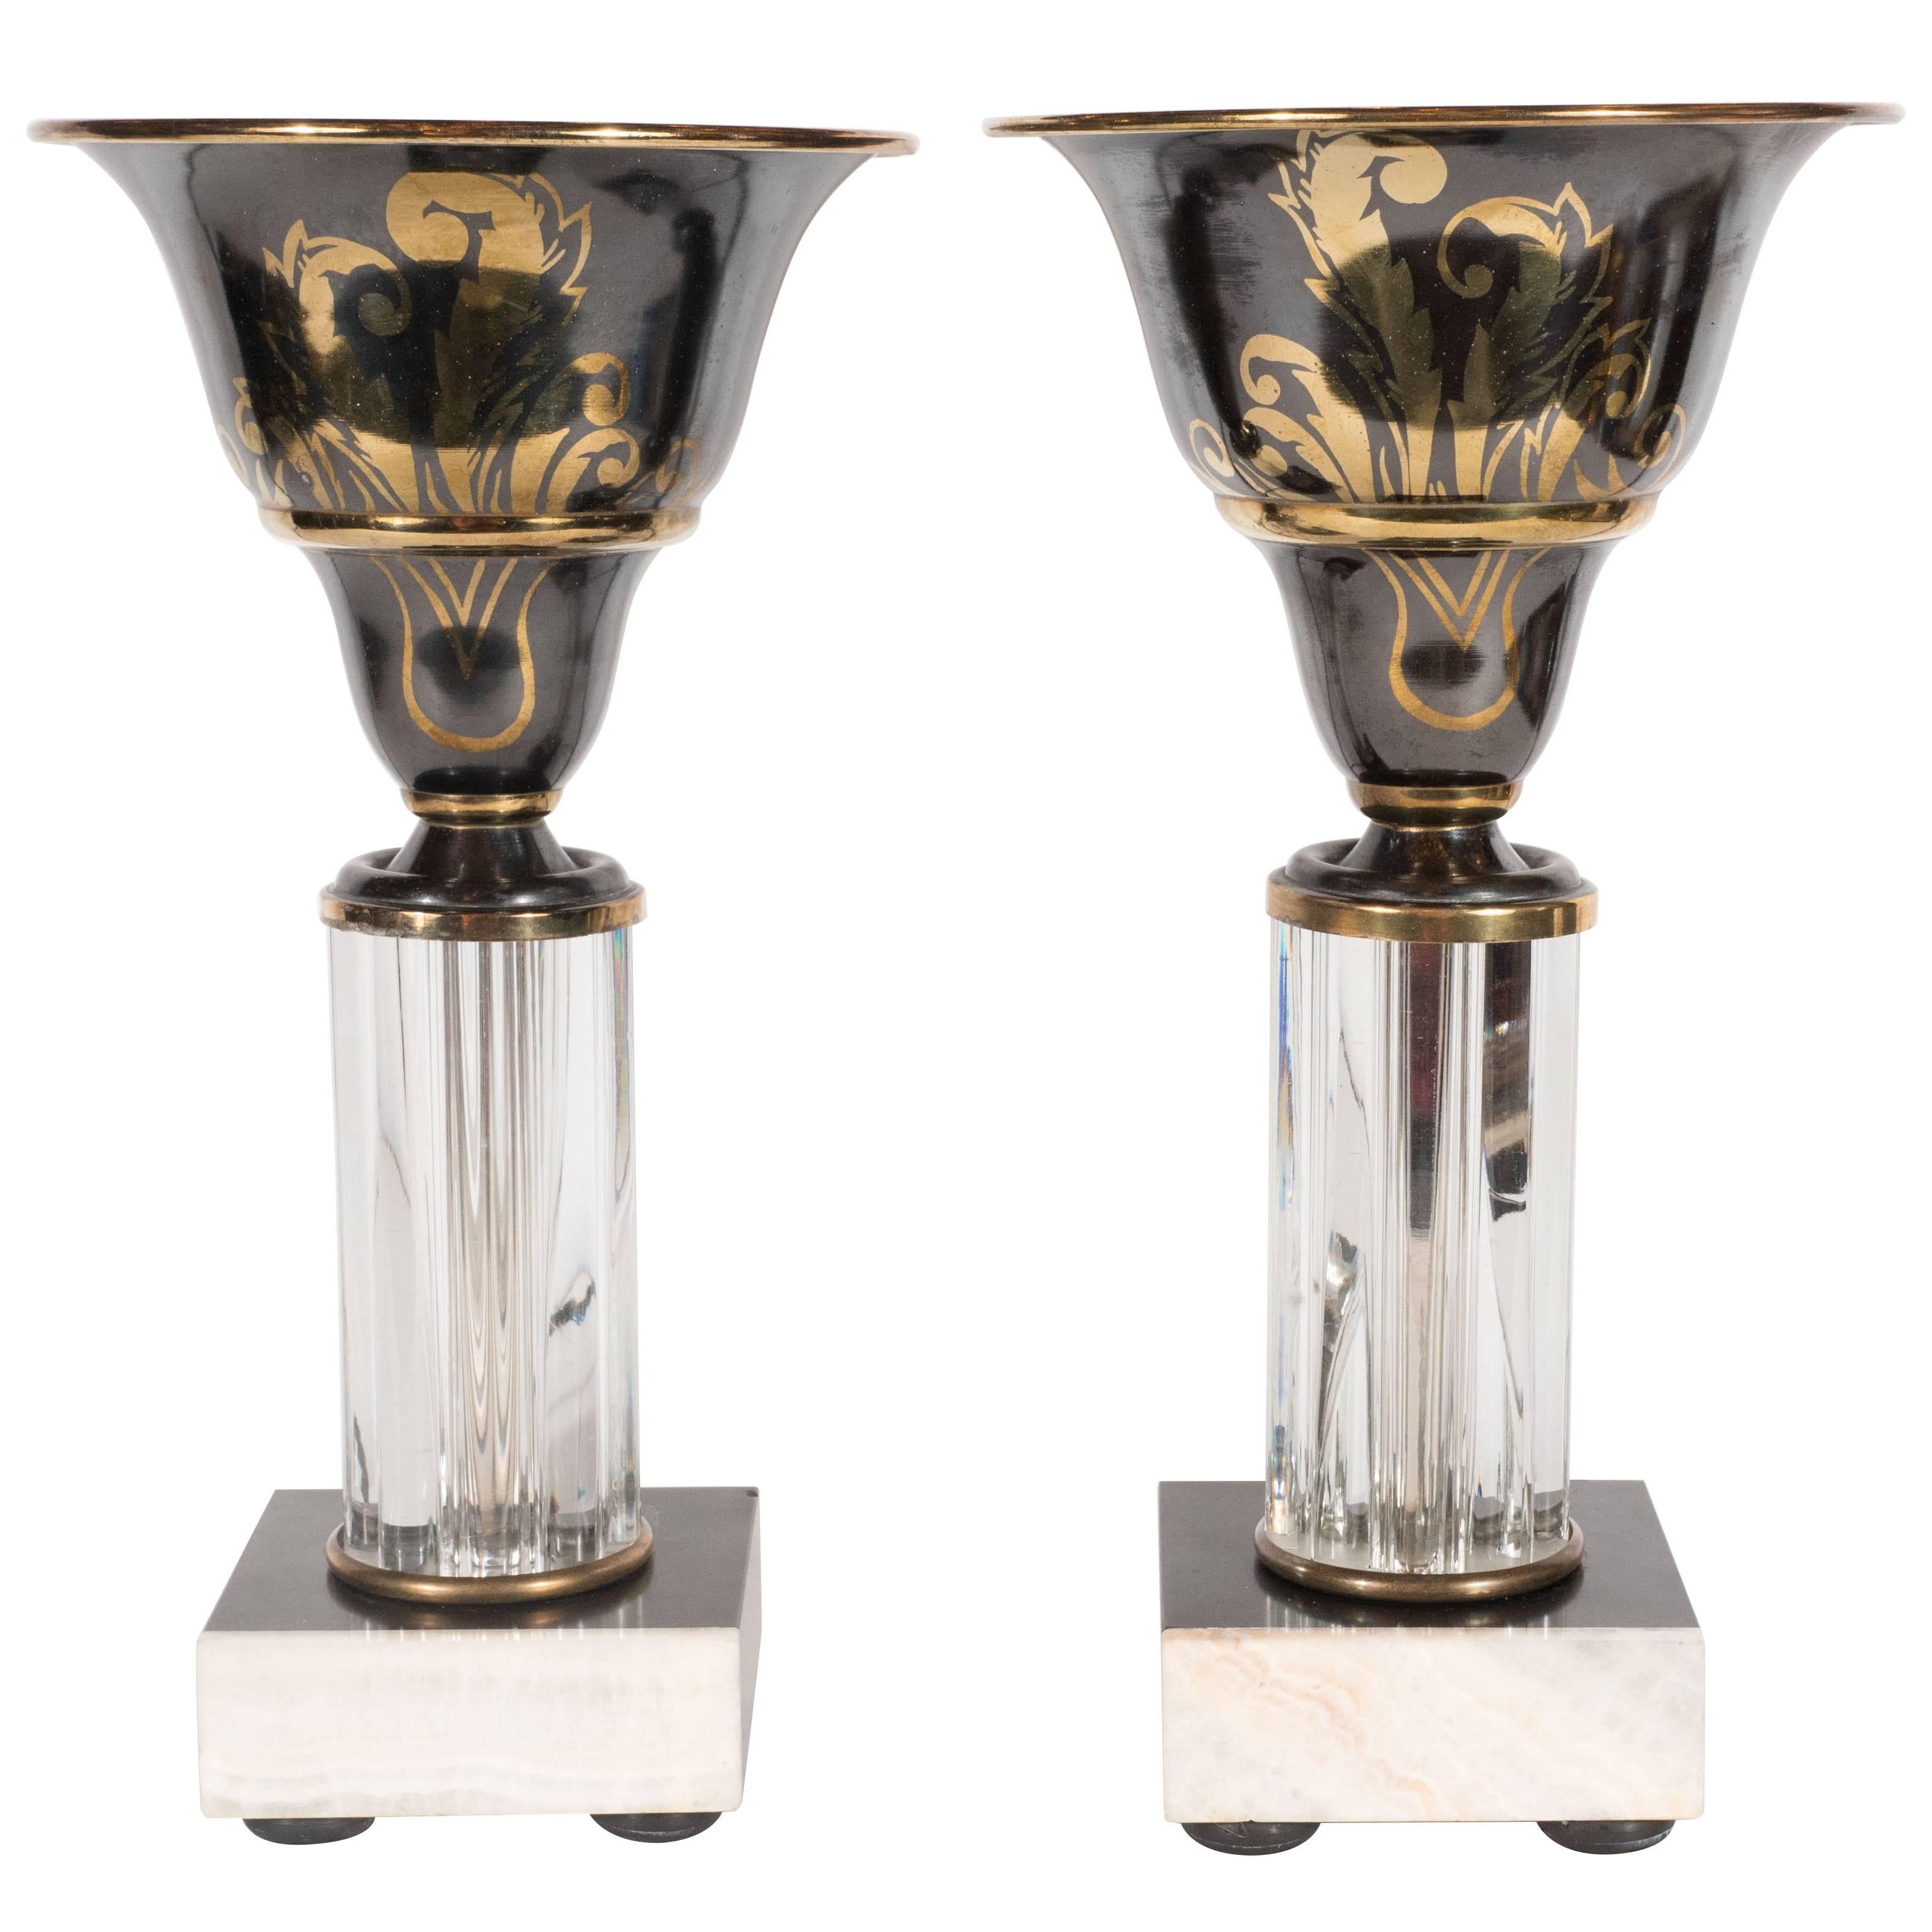 Pair of Art Deco Onyx, Marble, Bronze and Glass Uplights with Gilded Accents